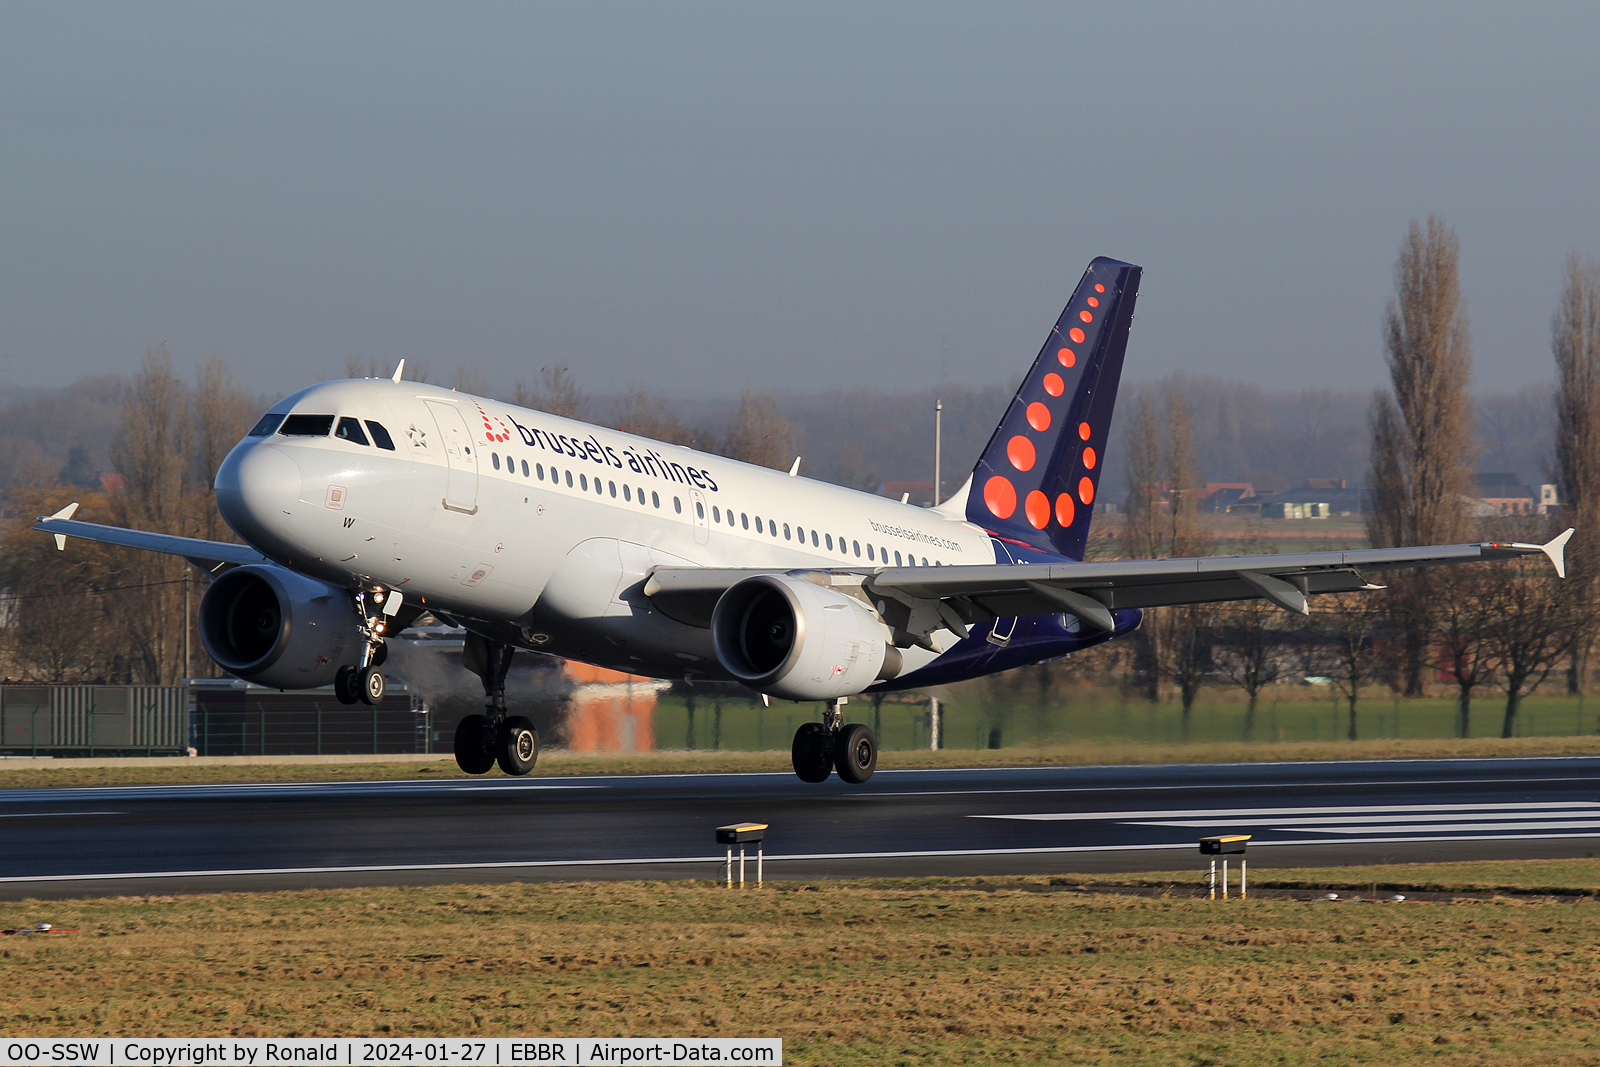 OO-SSW, 2007 Airbus A319-111 C/N 3255, at ebbr